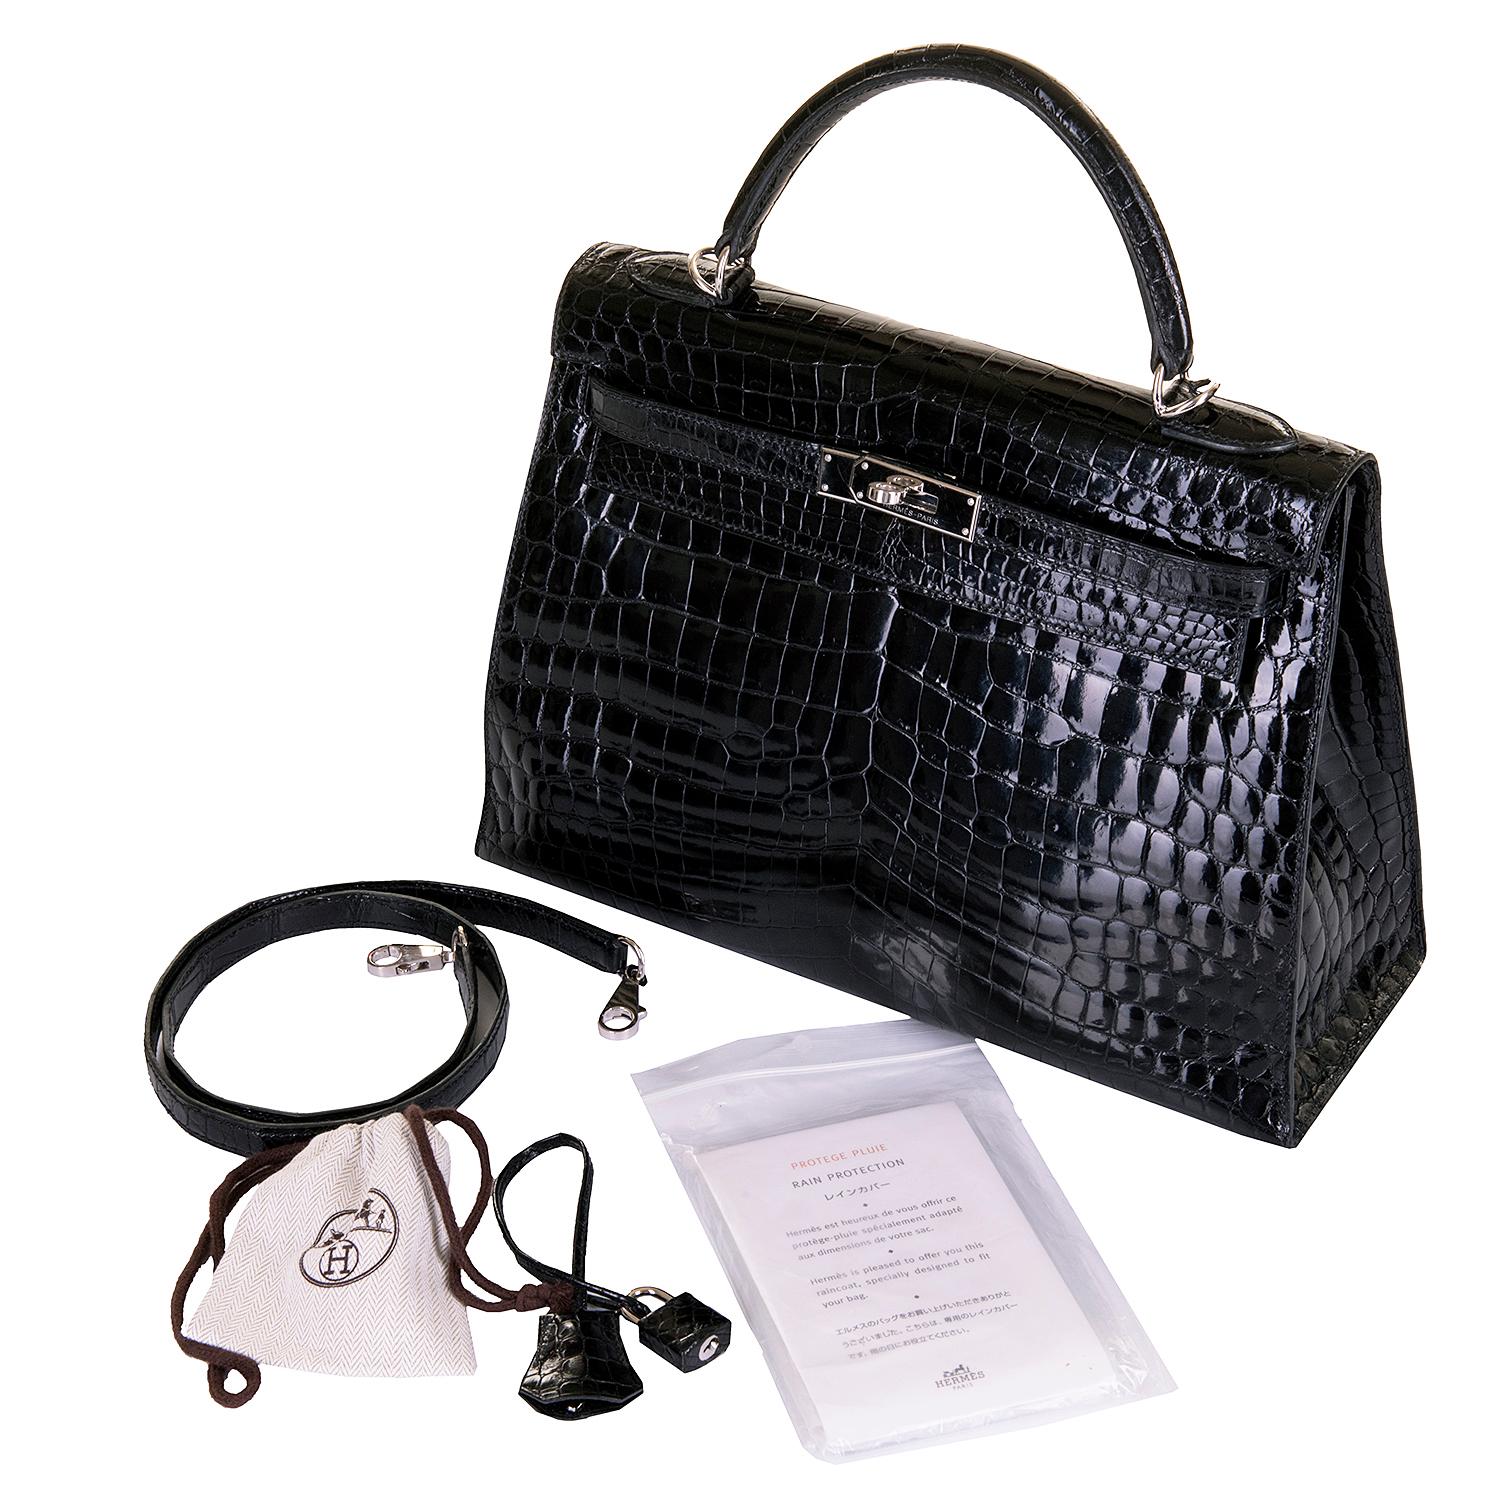 This beautiful Kelly 'Sellier' 32cm Bag is finished in Shiny Black Crocodile accented with Silver Palladium hardware. This much sought-after rare bag comes complete with it's detachable crocodile shoulder strap and matching padlock, key-fob and two